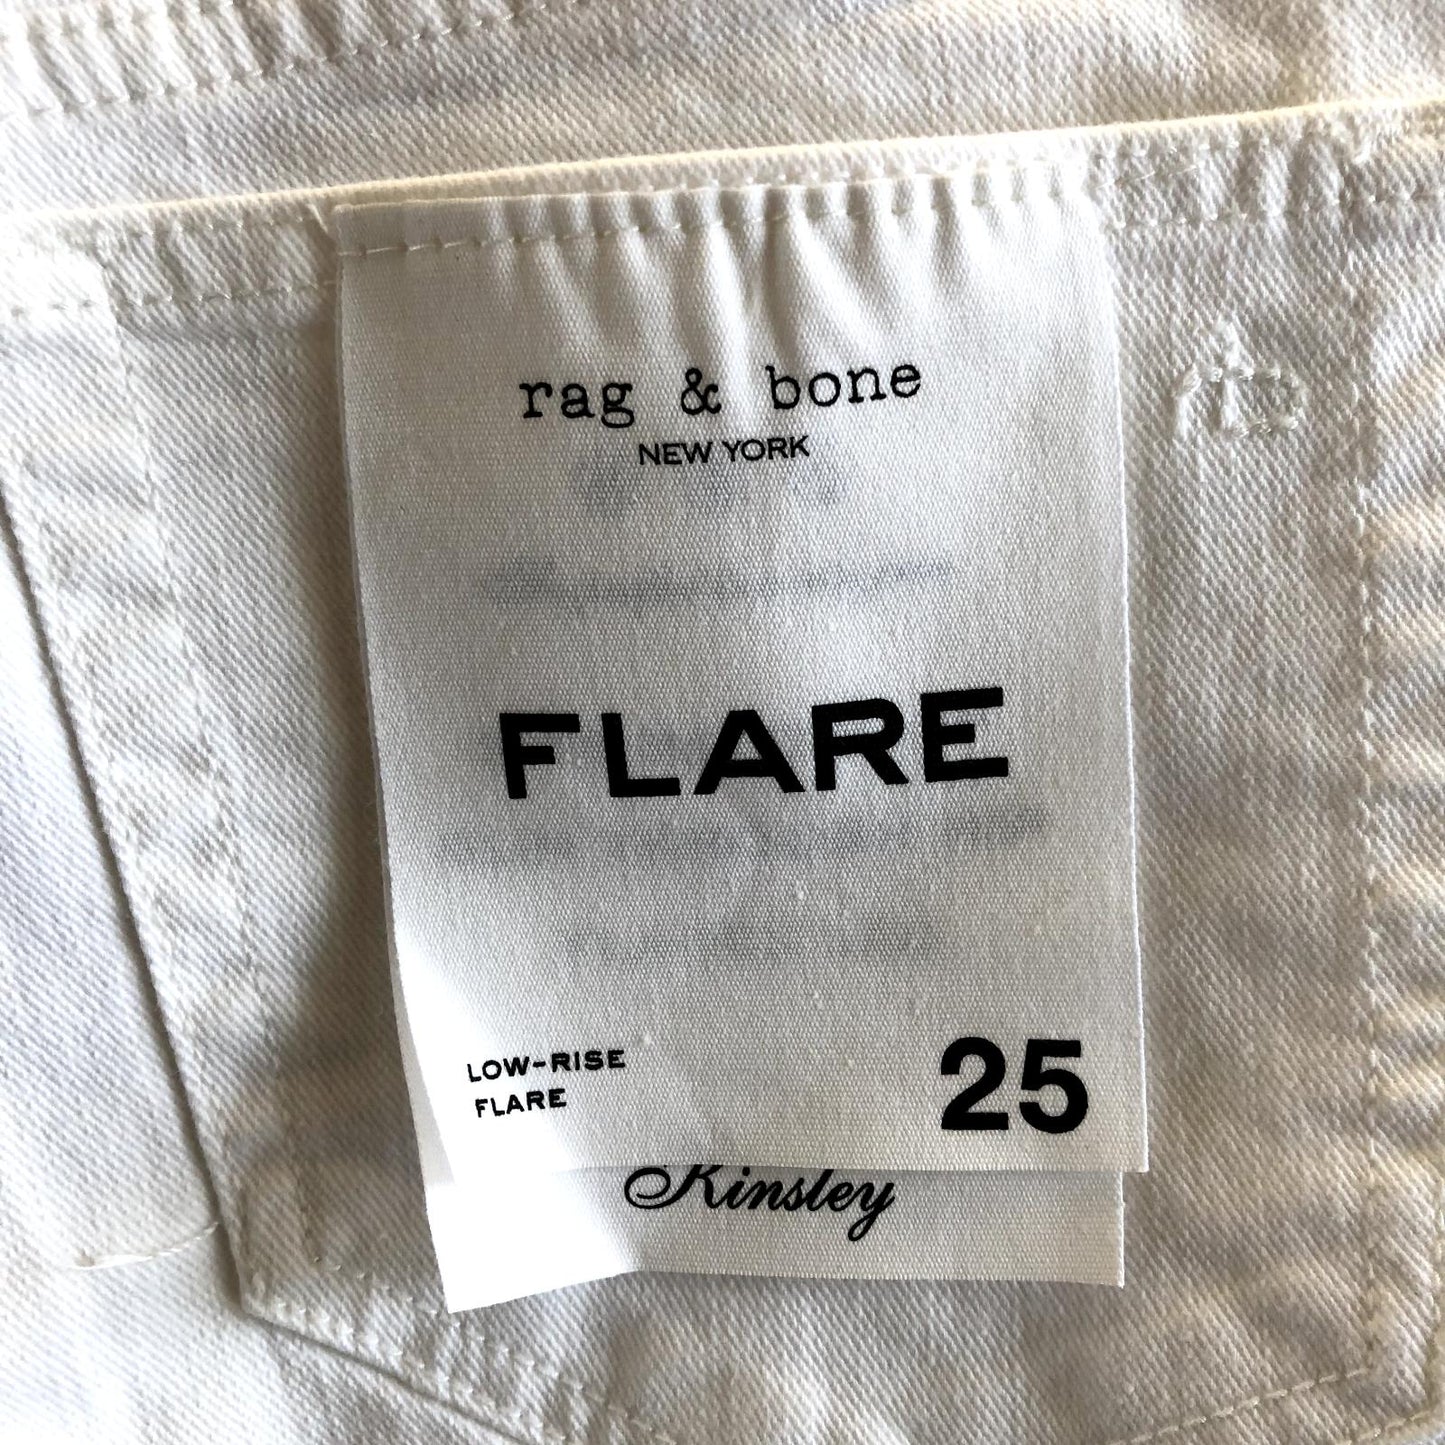 25 - Rag & Bone $255 Optic White Kinsely Low Rise Flare Jeans NEW 0131LD